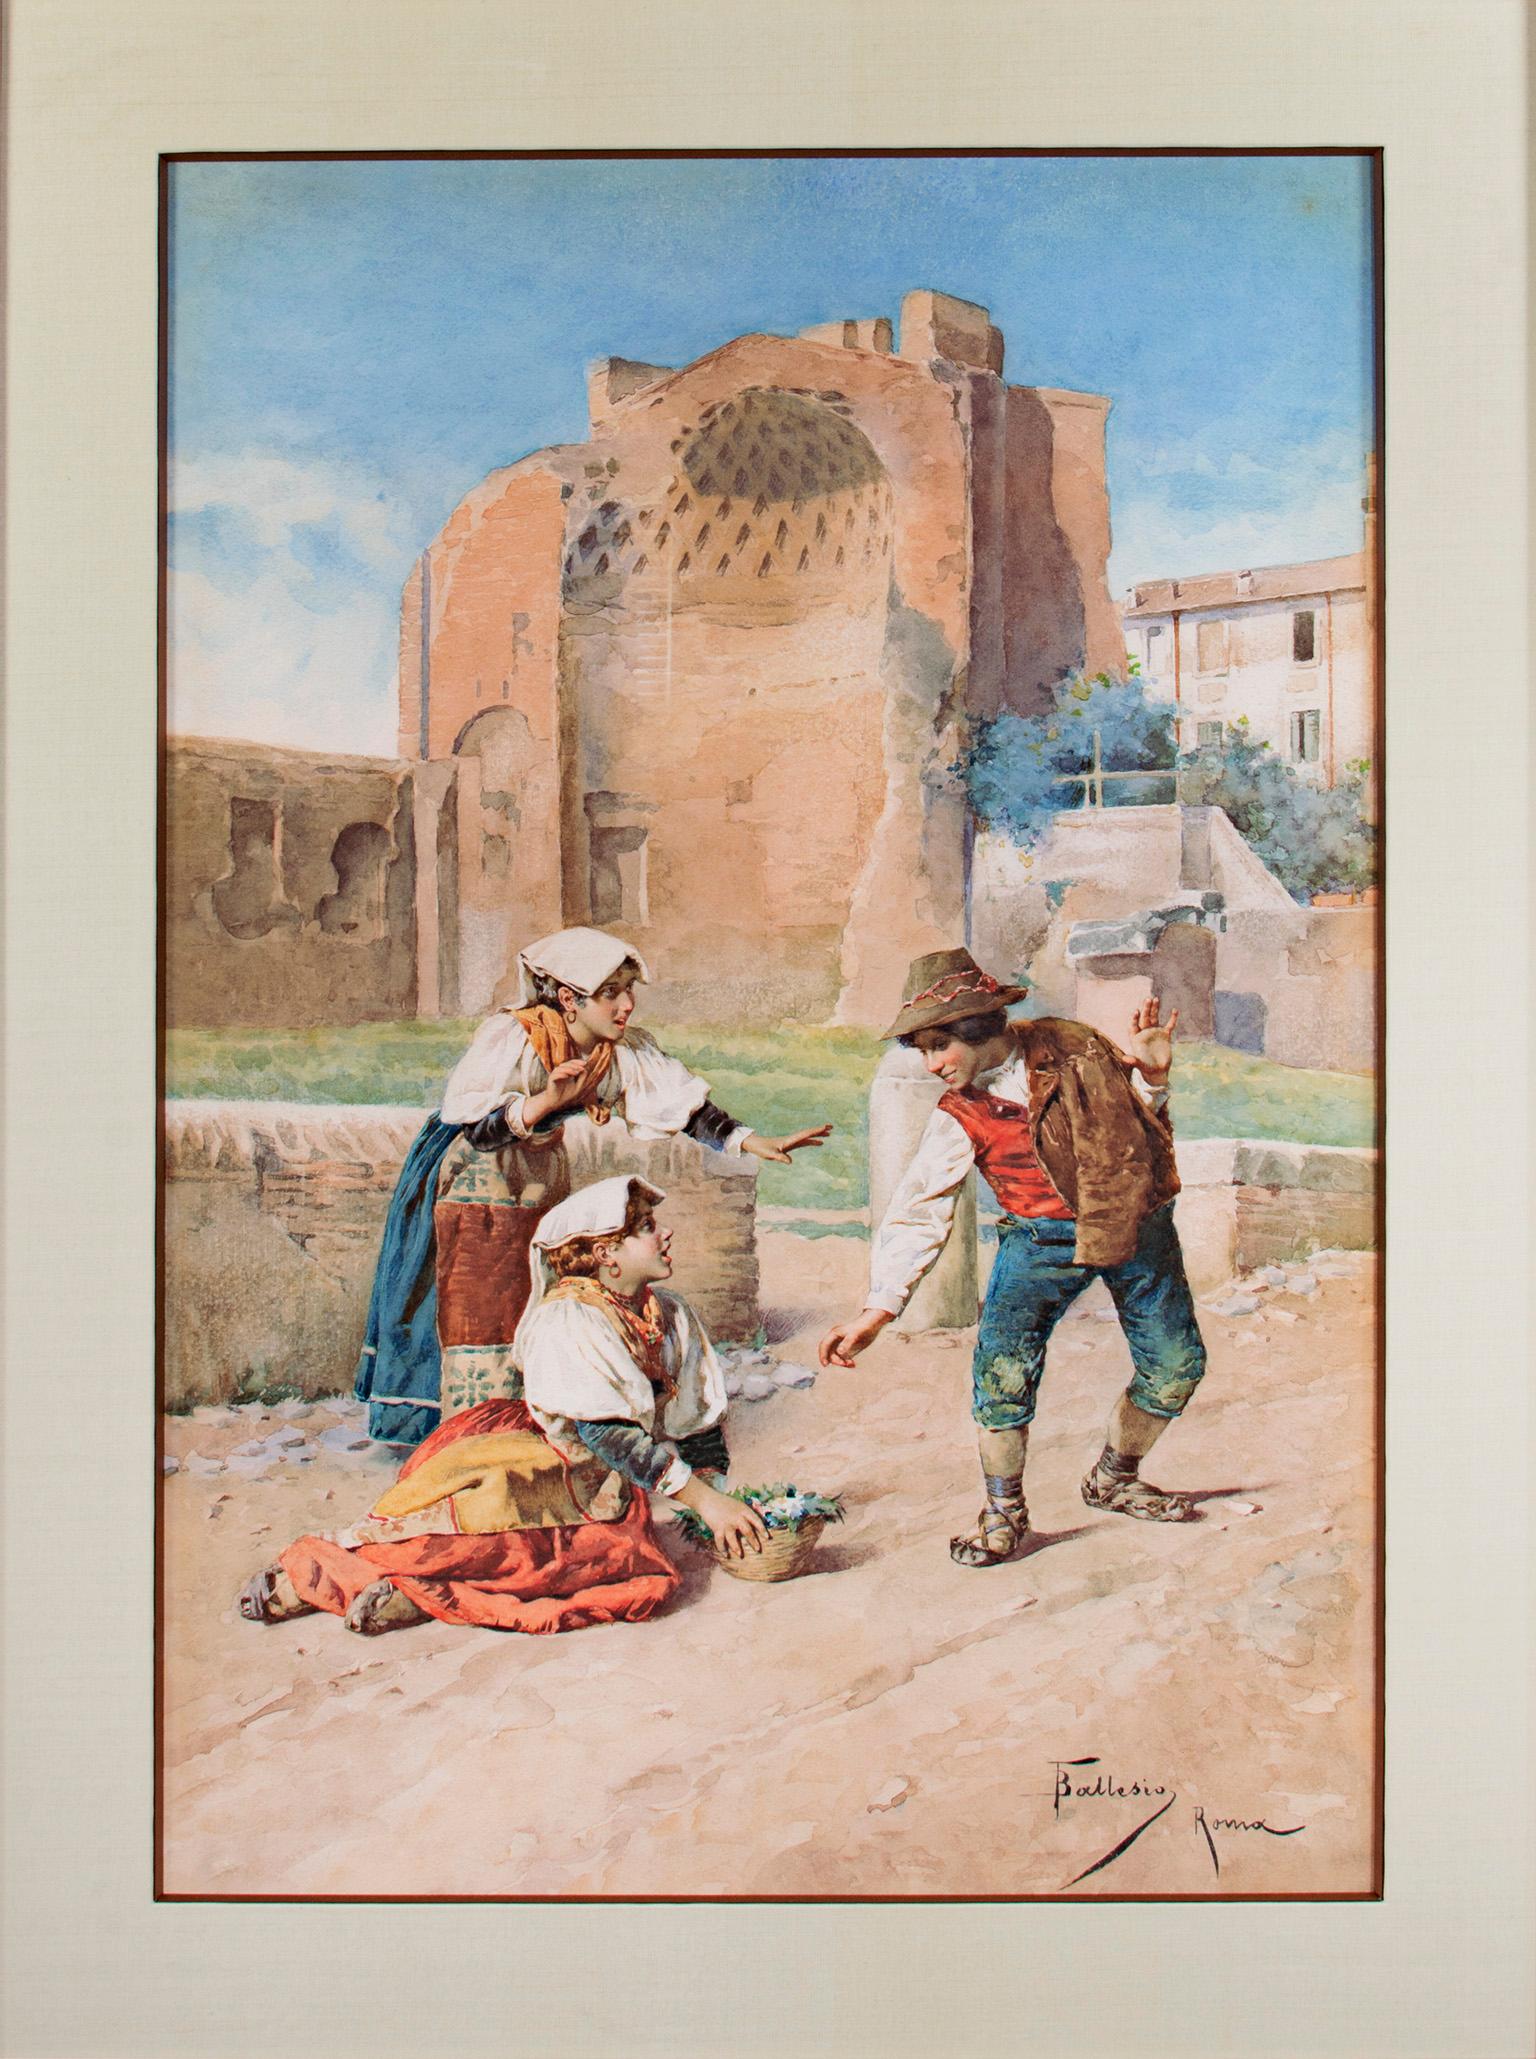 "Three Children Playing In a Courtyard" is a Giclee print on watercolor paper after the original c.1900 watercolor. It features three children caught at the very height of playing together. Their clothes are rich and bold, accenting the dynamic